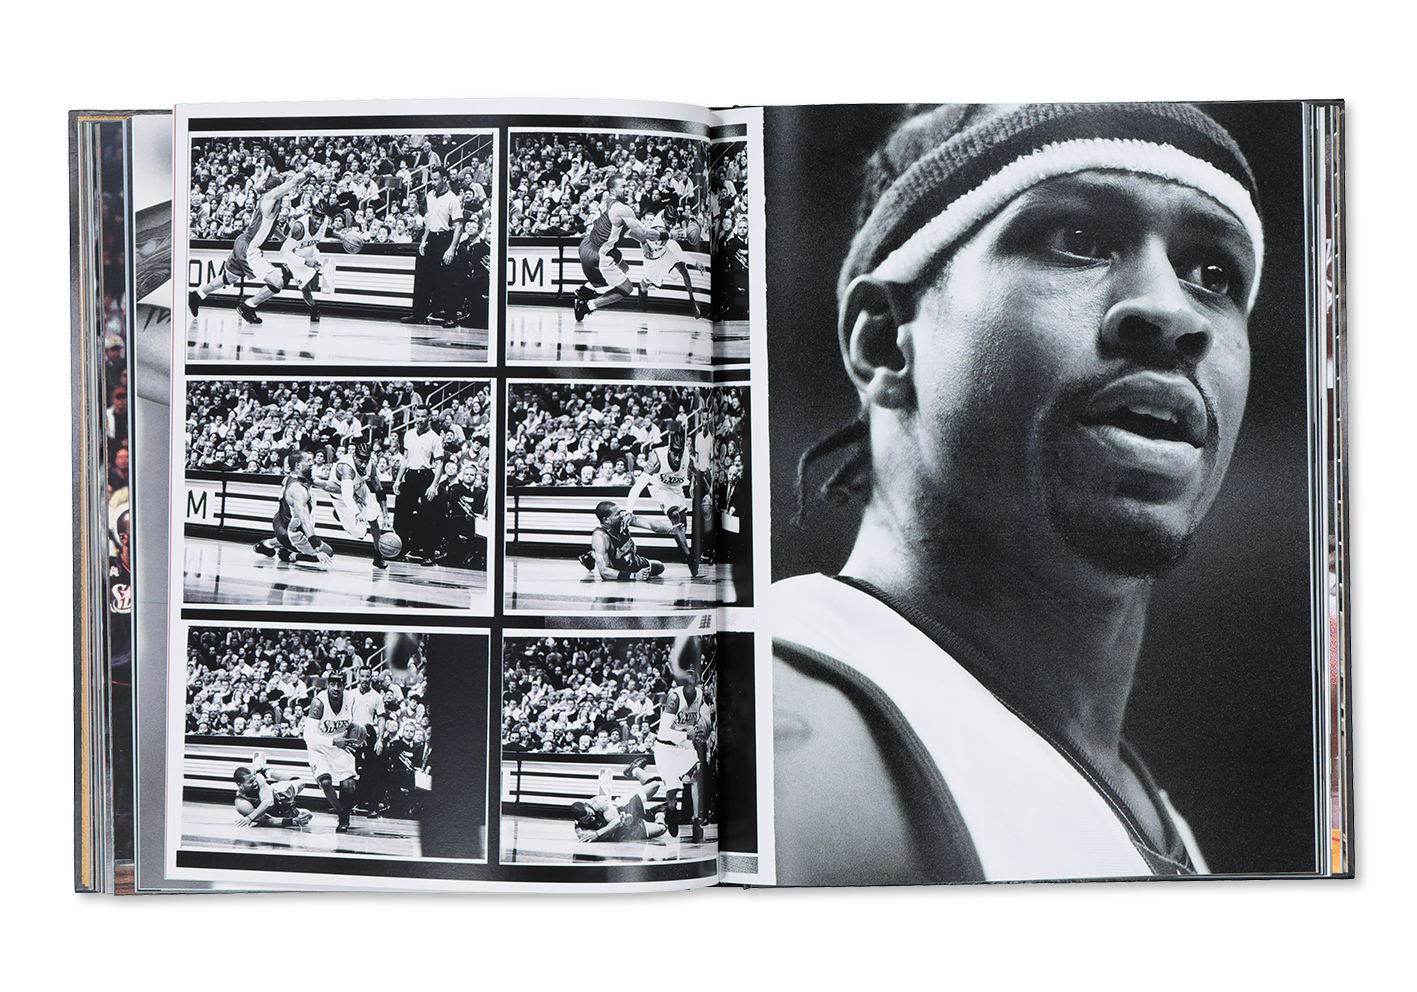 THE IVERSON BOOK - GARY LAND (SIGNED)